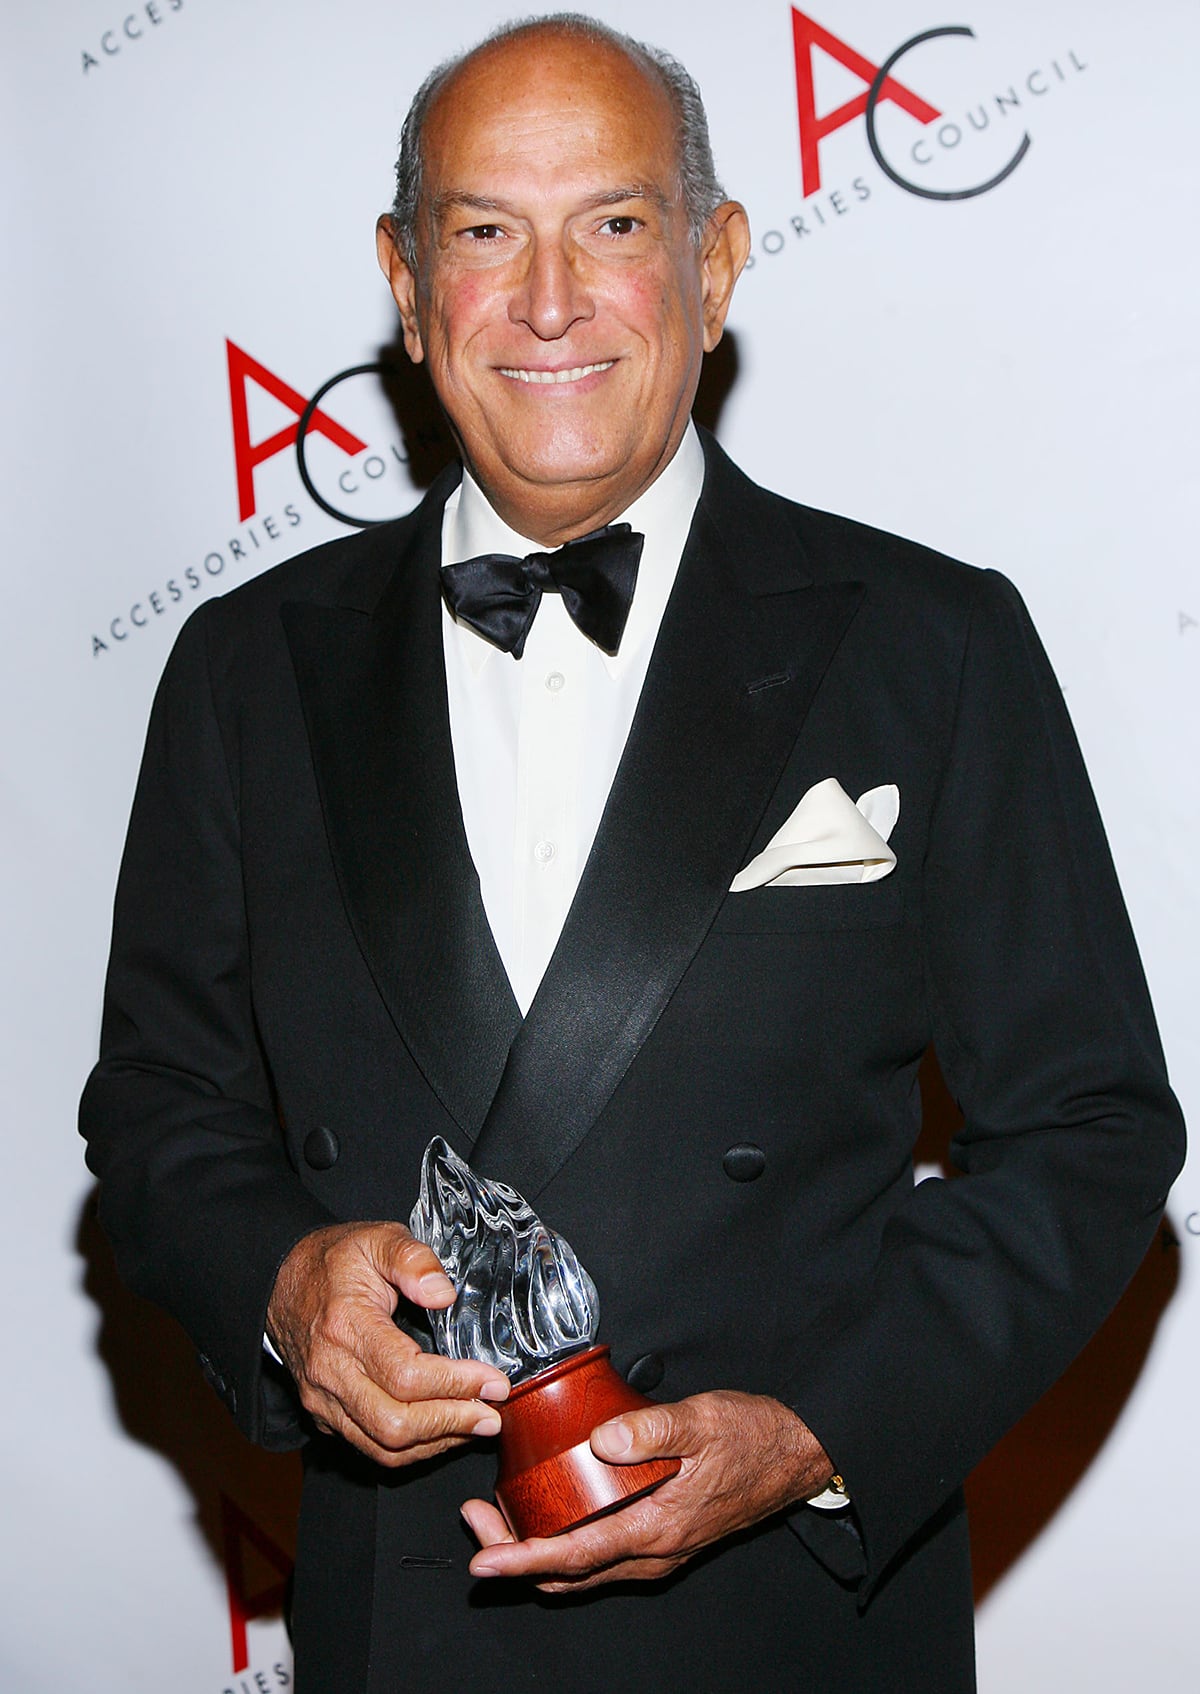 Oscar de la Renta holding his Designer of the Year award at Accessories Council's 9th Annual ACE Awards on November 8, 2005